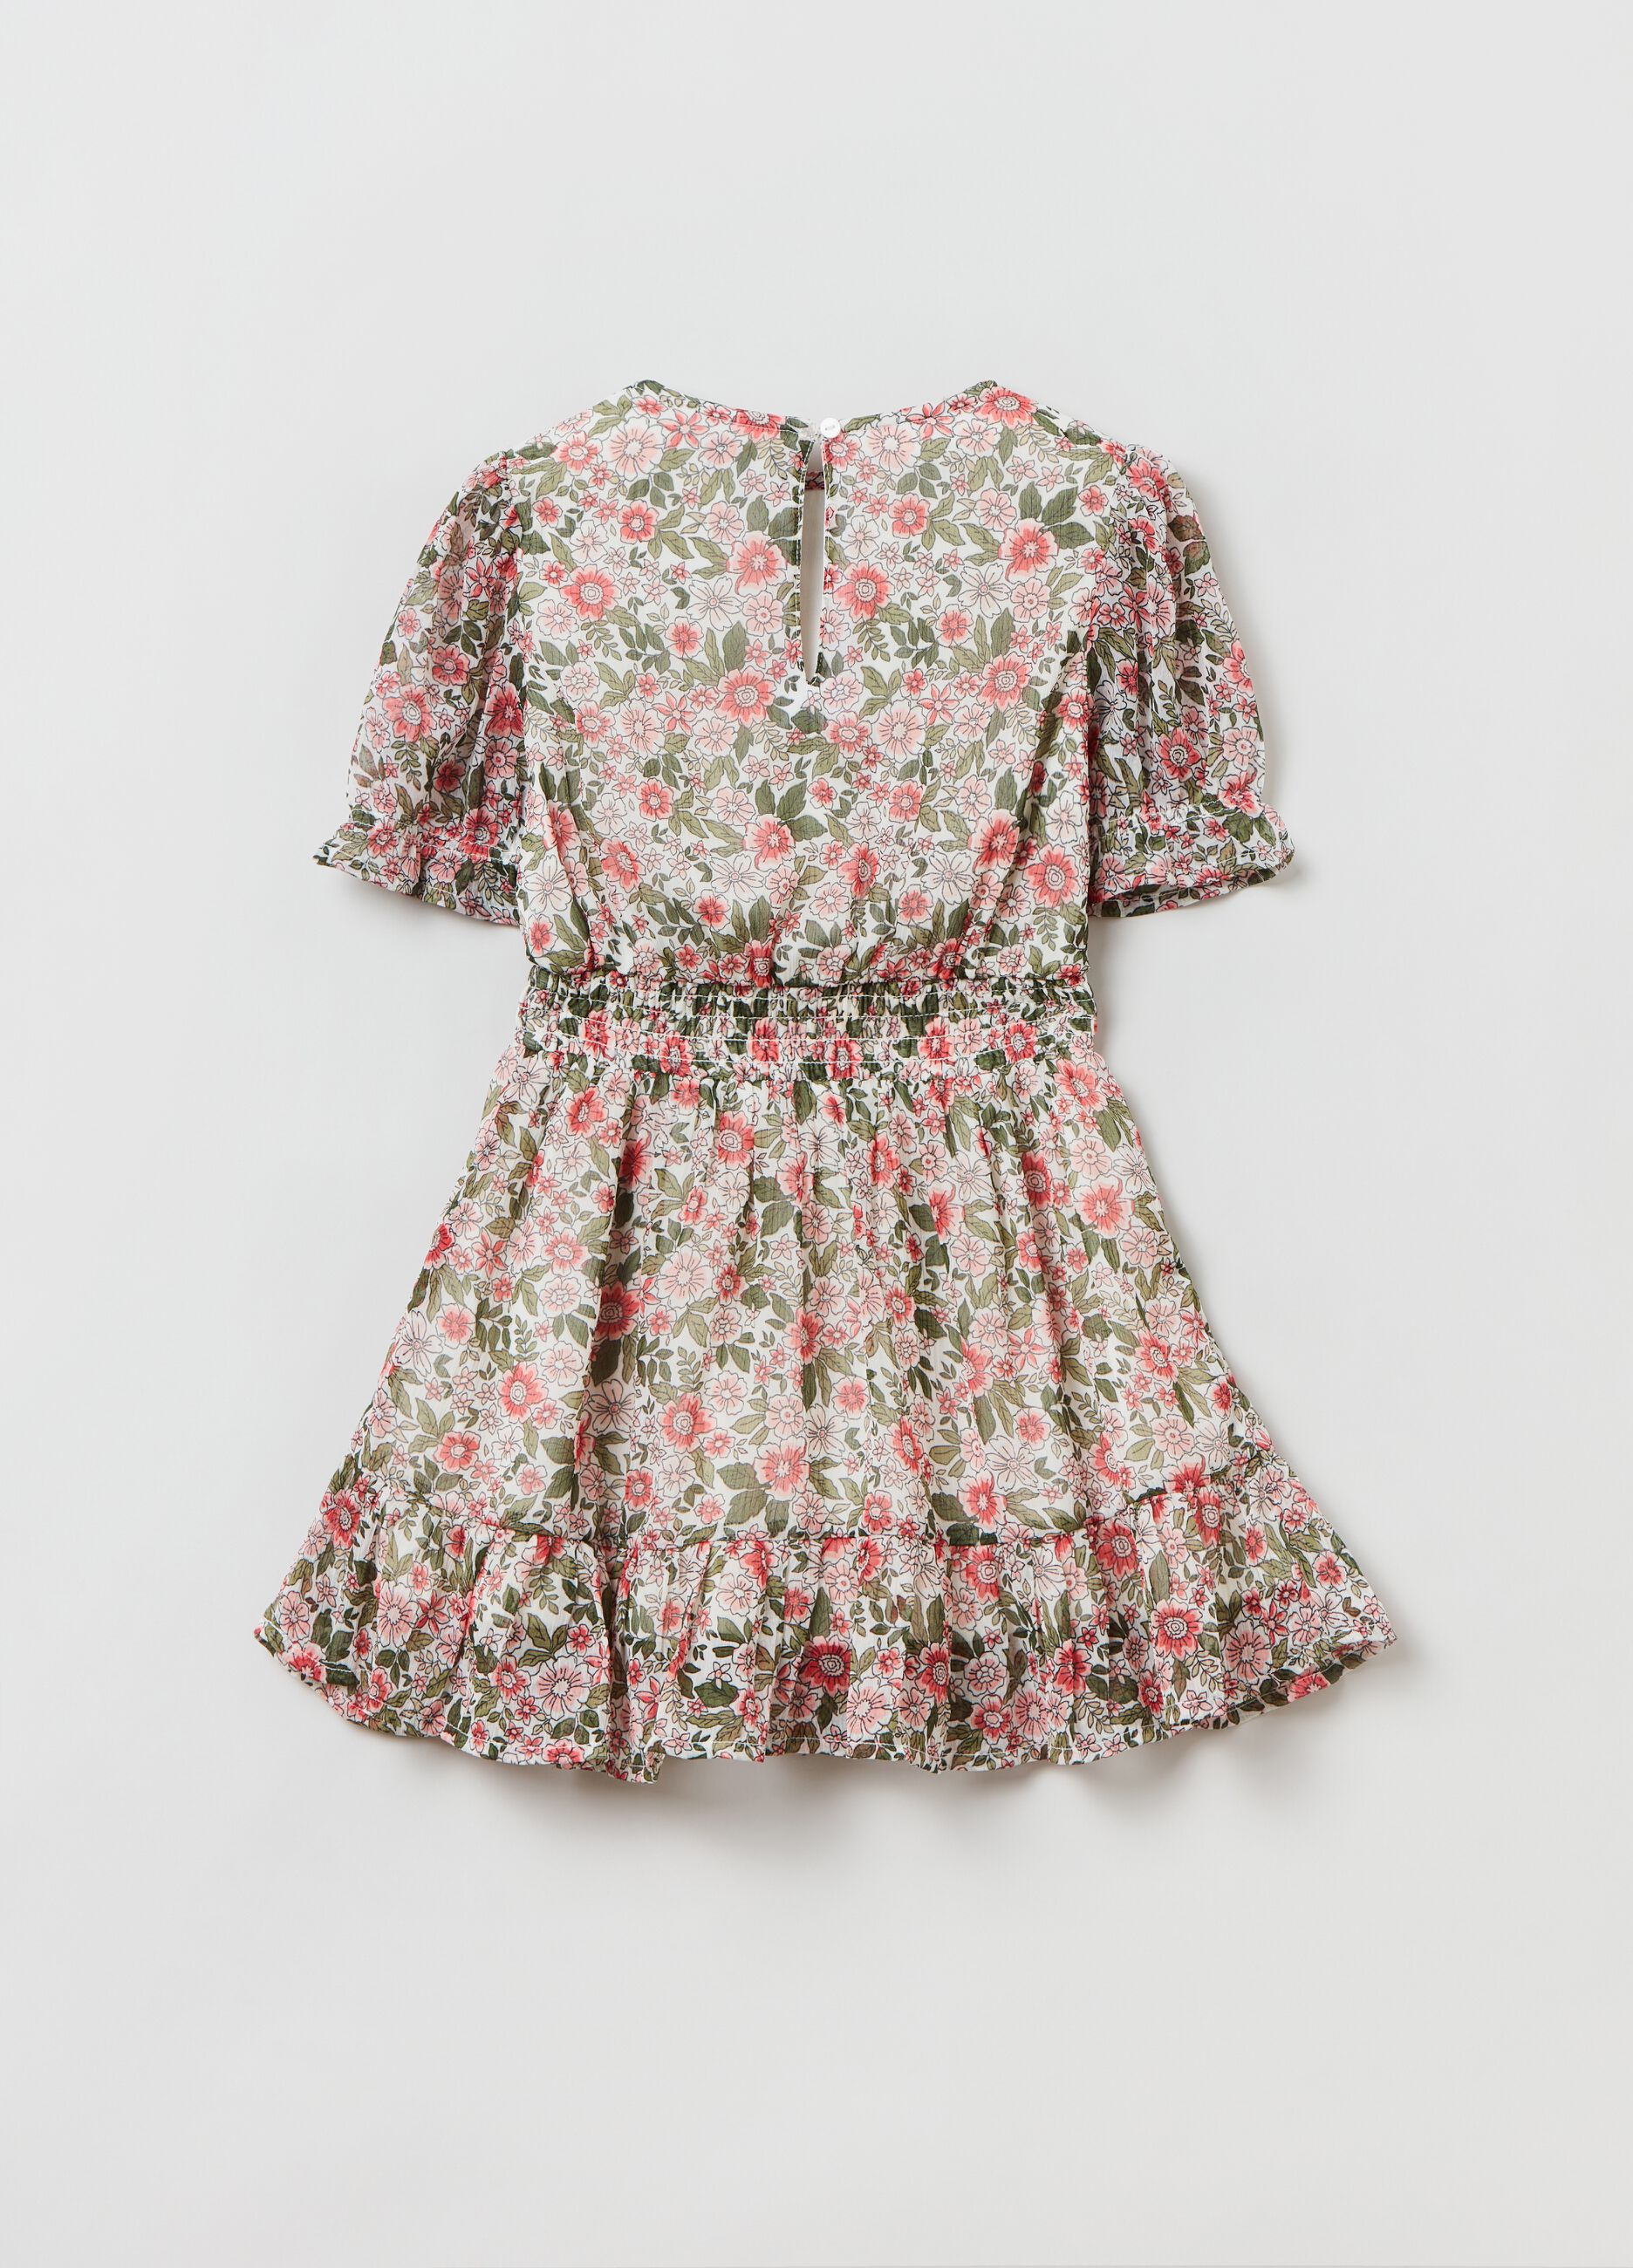 Floral dress with flounce